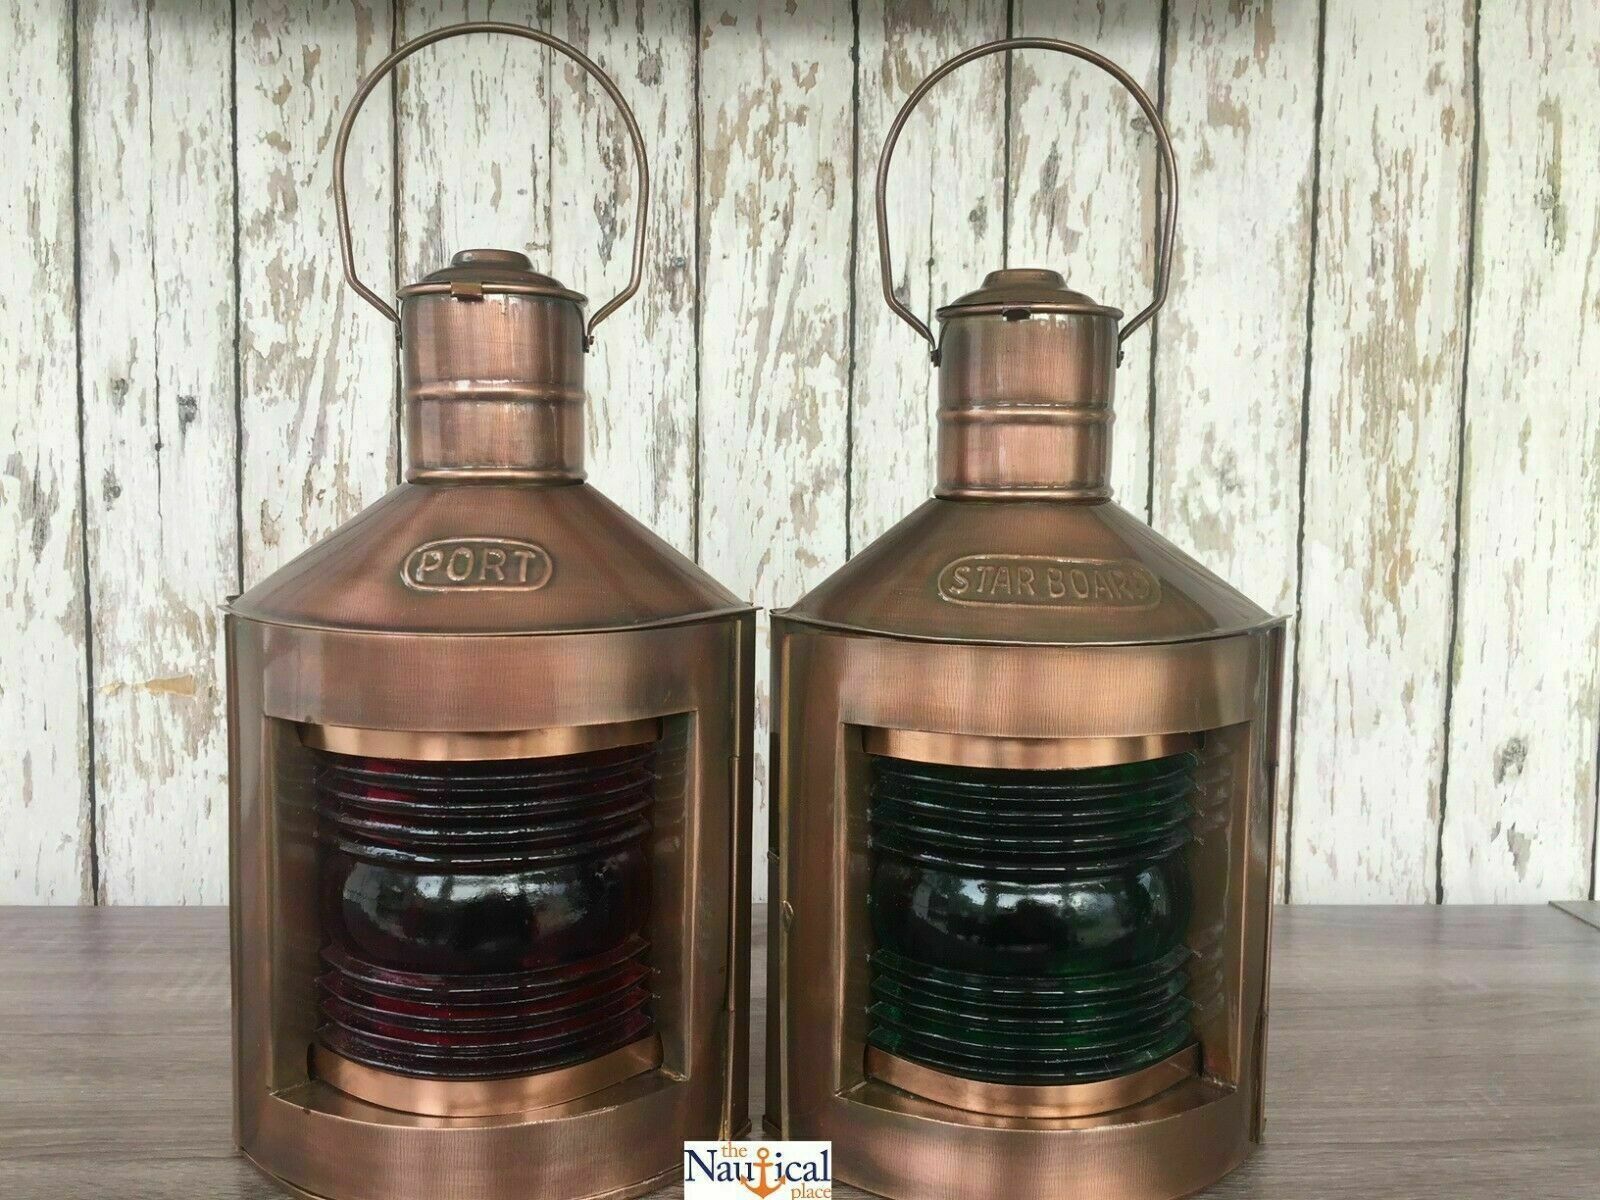 Pair Of Nautical Lantern Port And Starboard Oil Lantern Made From Metal